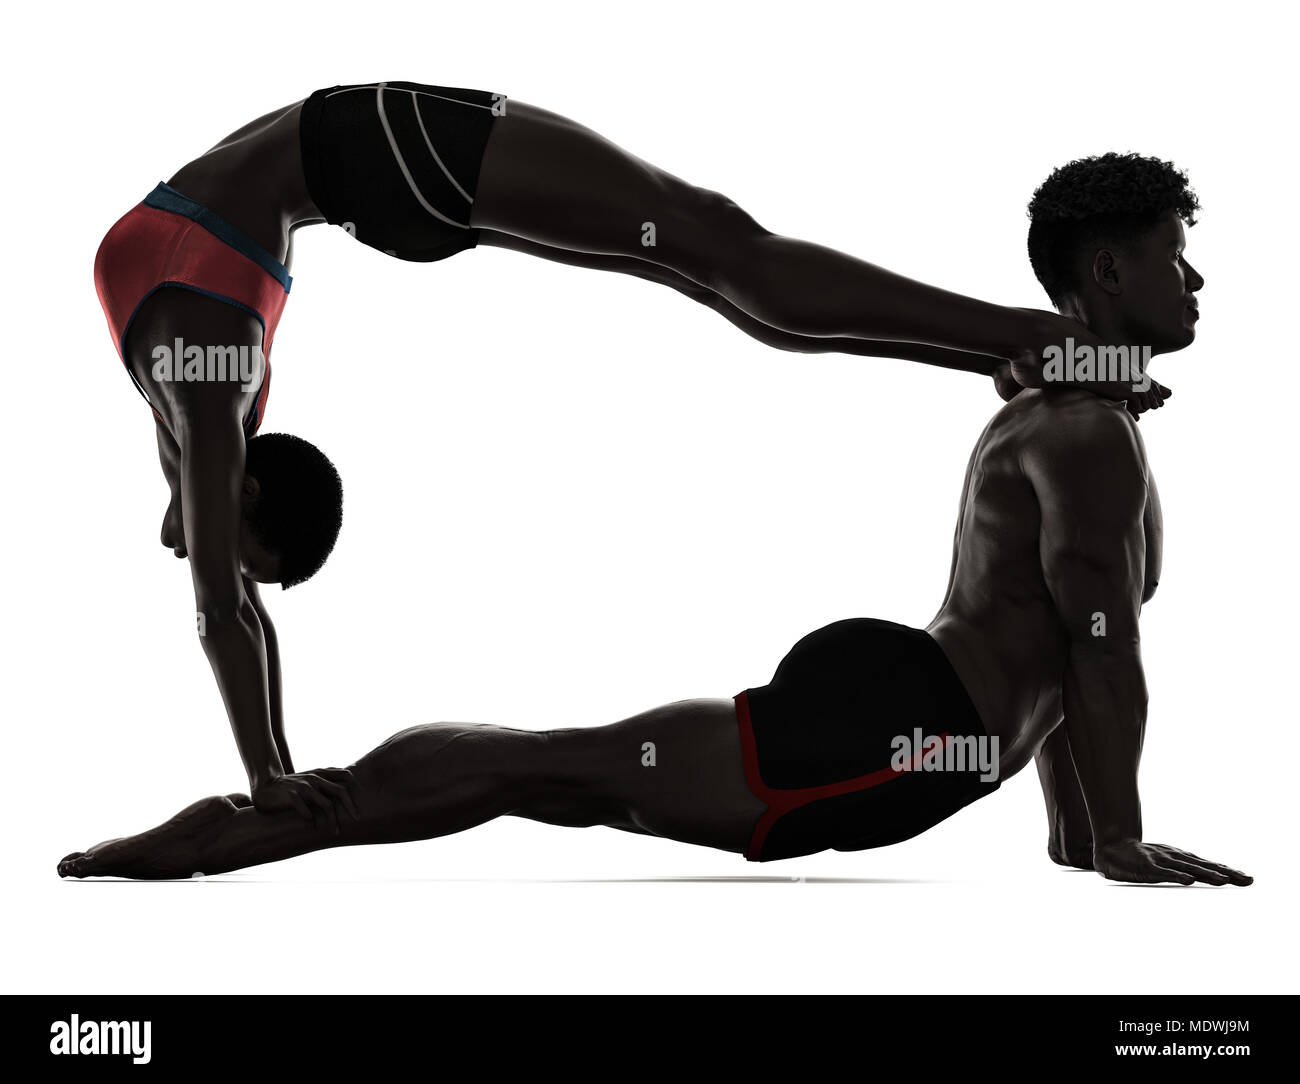 Couple in a yoga pose - 3D computer generated graphic Stock Photo